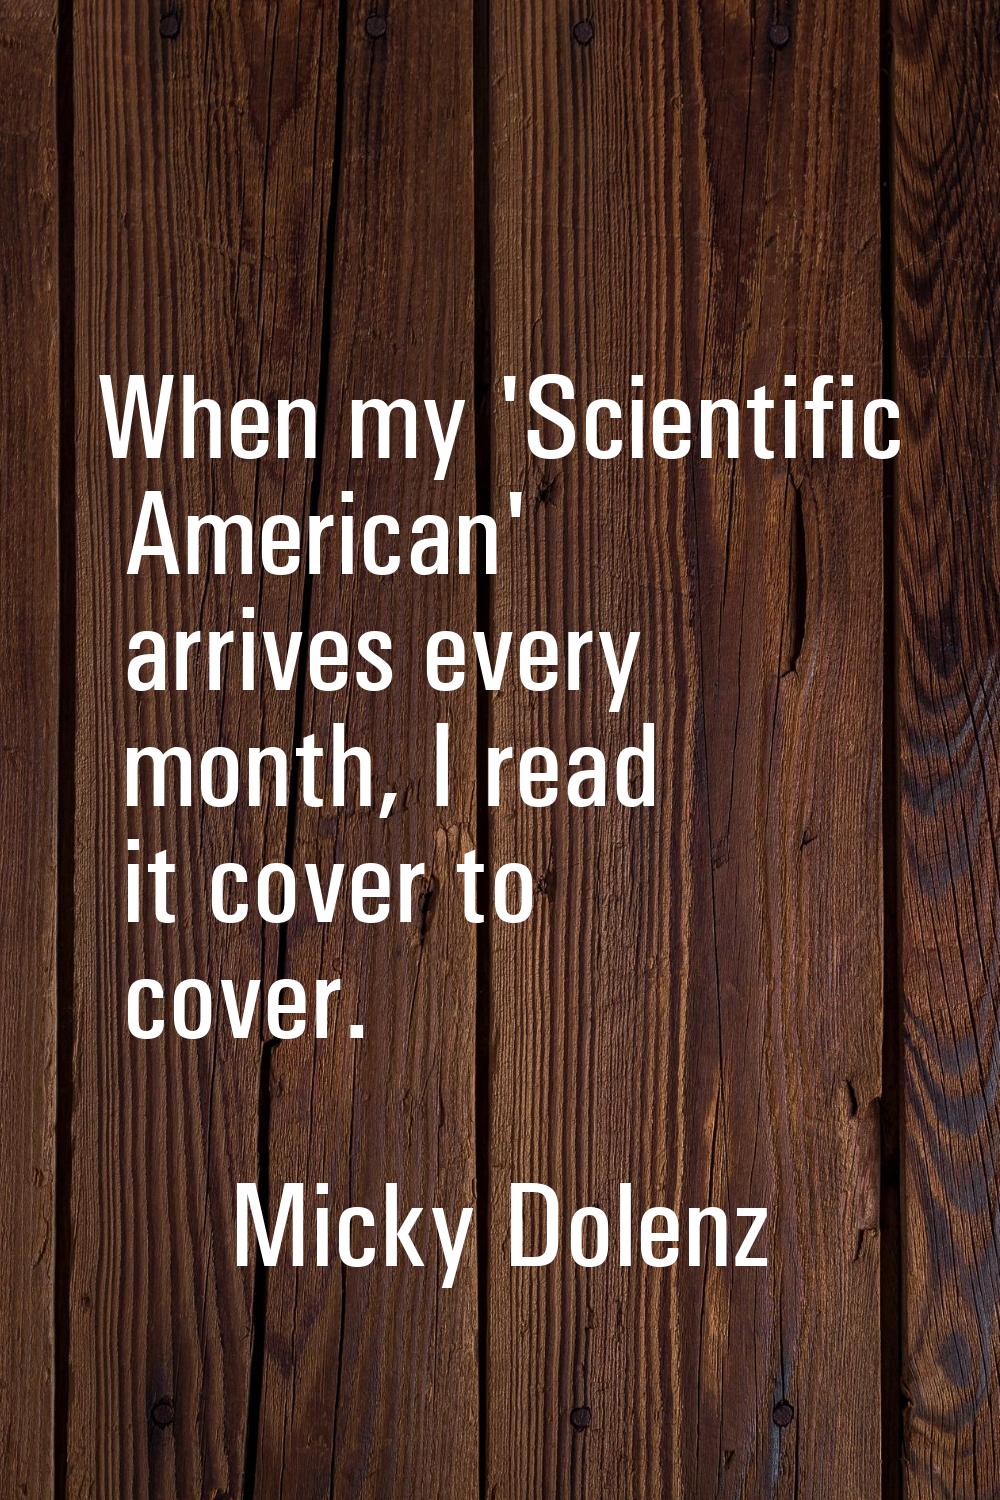 When my 'Scientific American' arrives every month, I read it cover to cover.